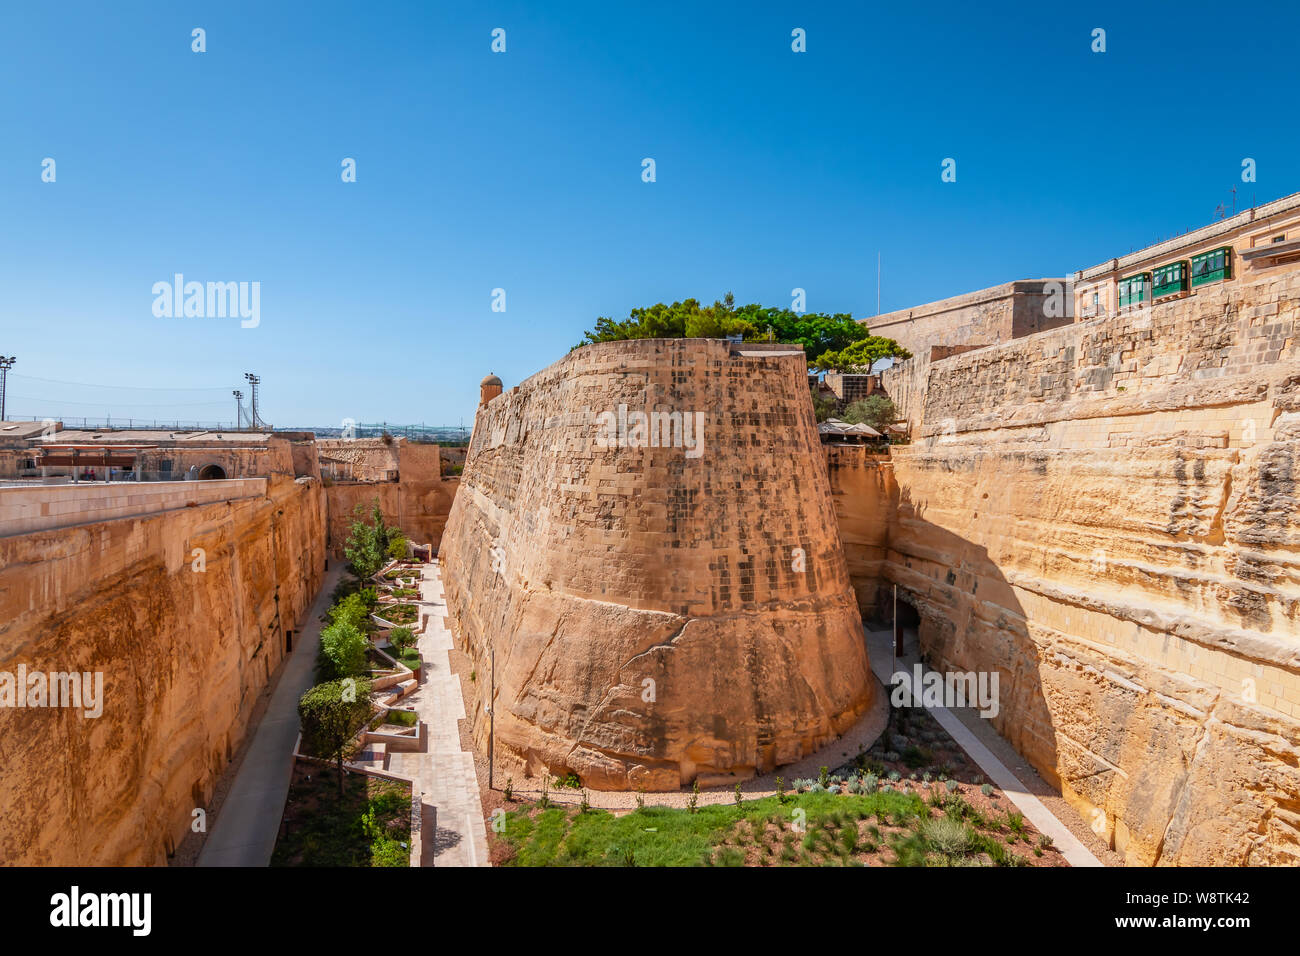 Ancient Fortification Wall at City Gate of Valletta, Malta Stock Photo